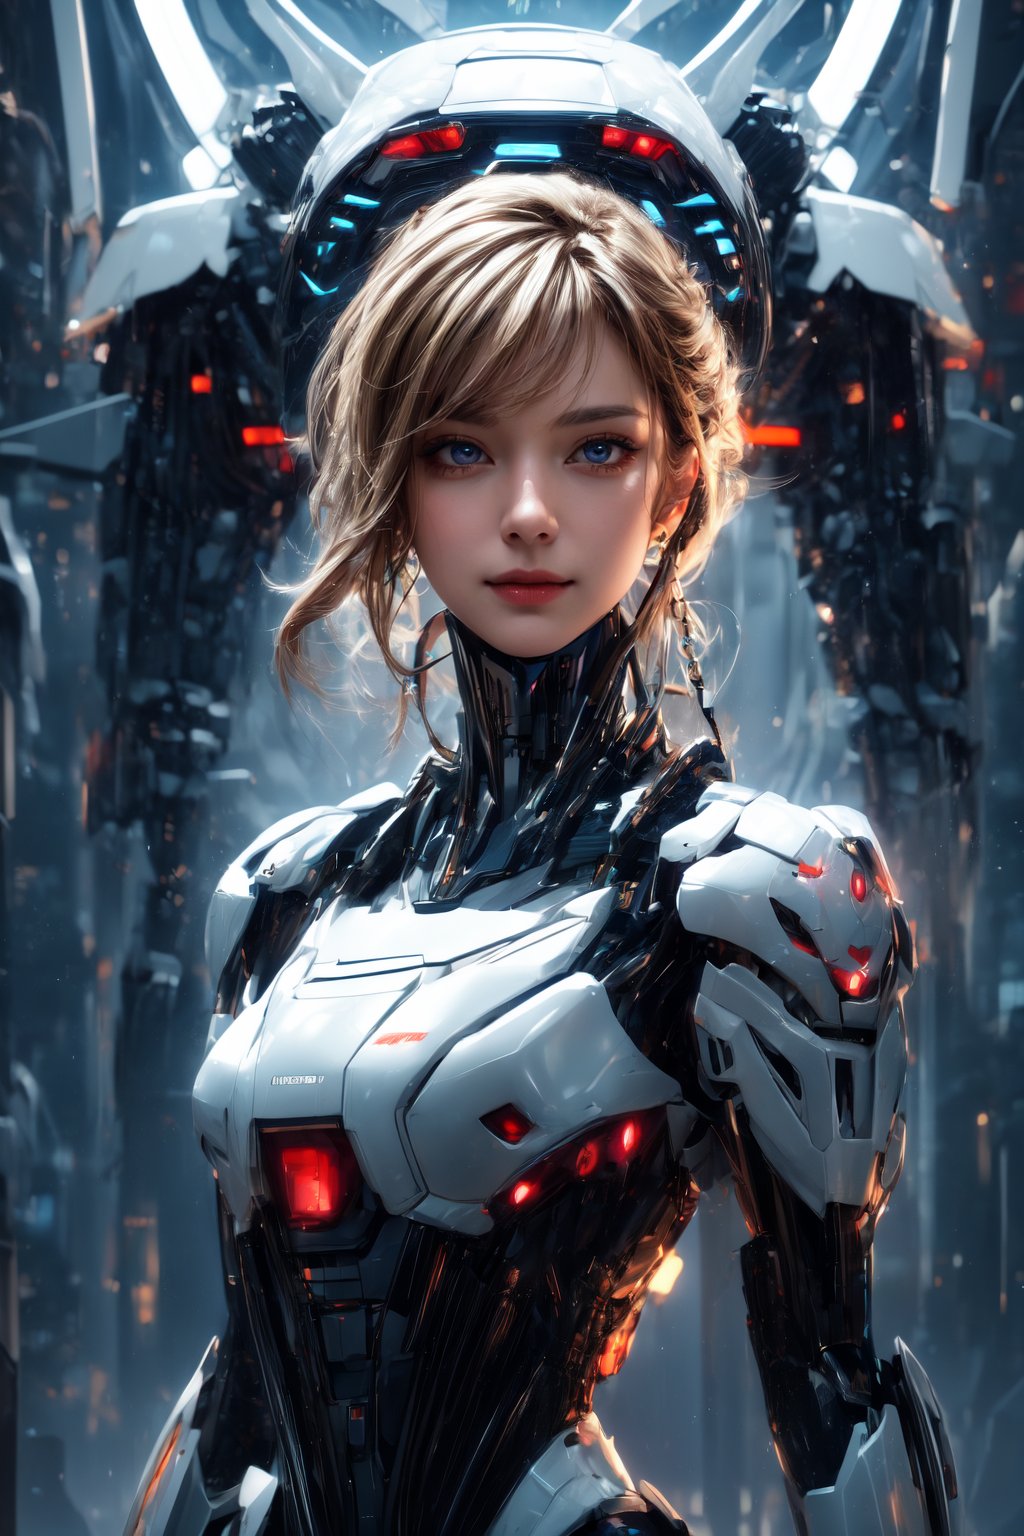 Masterpiece, High quality, 64K, Unity 64K Wallpaper, HDR, Best Quality, RAW, Super Fine Photography, Super High Resolution, Super Detailed, 
Beautiful and Aesthetic, Stunningly beautiful, Perfect proportions, 
1girl, Solo, White skin, Detailed skin, Realistic skin details, 
Futuristic Mecha, Arms Mecha, Dynamic pose, Battle stance, Swaying hair, by FuturEvoLab, 
Dark City Night, Cyberpunk city, Cyberpunk architecture, Future architecture, Fine architecture, Accurate architectural structure, Detailed complex busy background, Gorgeous, 
Sharp focus, Perfect facial features, Pure and pretty, Perfect eyes, Lively eyes, Elegant face, Exquisite face, Delicate face, Matrix,